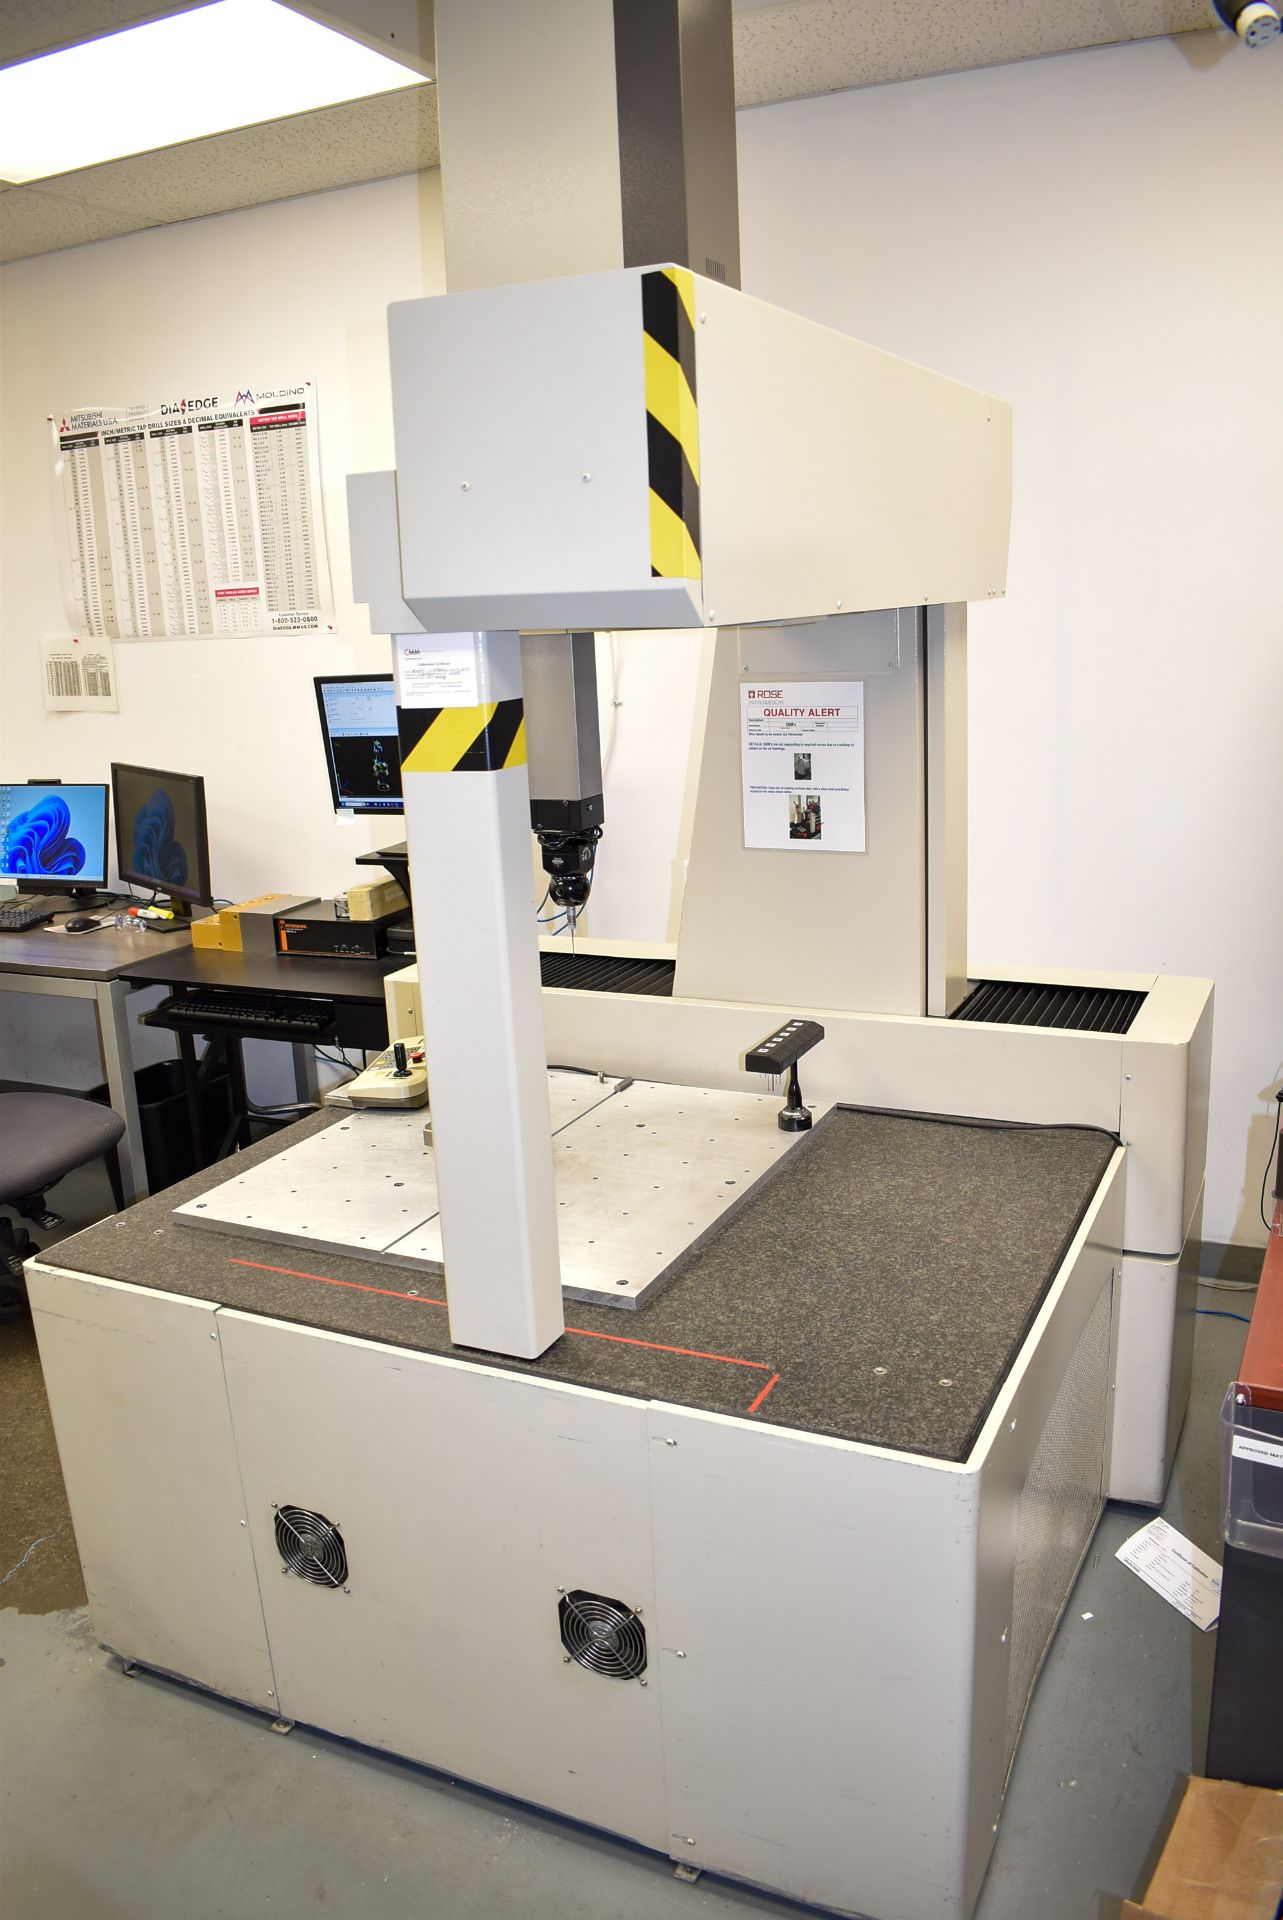 MITUTOYO A707 BRIGHT APEX A707 COORDINATE MEASURING MACHINE WITH 28" X 28" X 24" MEASURING ENVELOPE, - Image 9 of 12